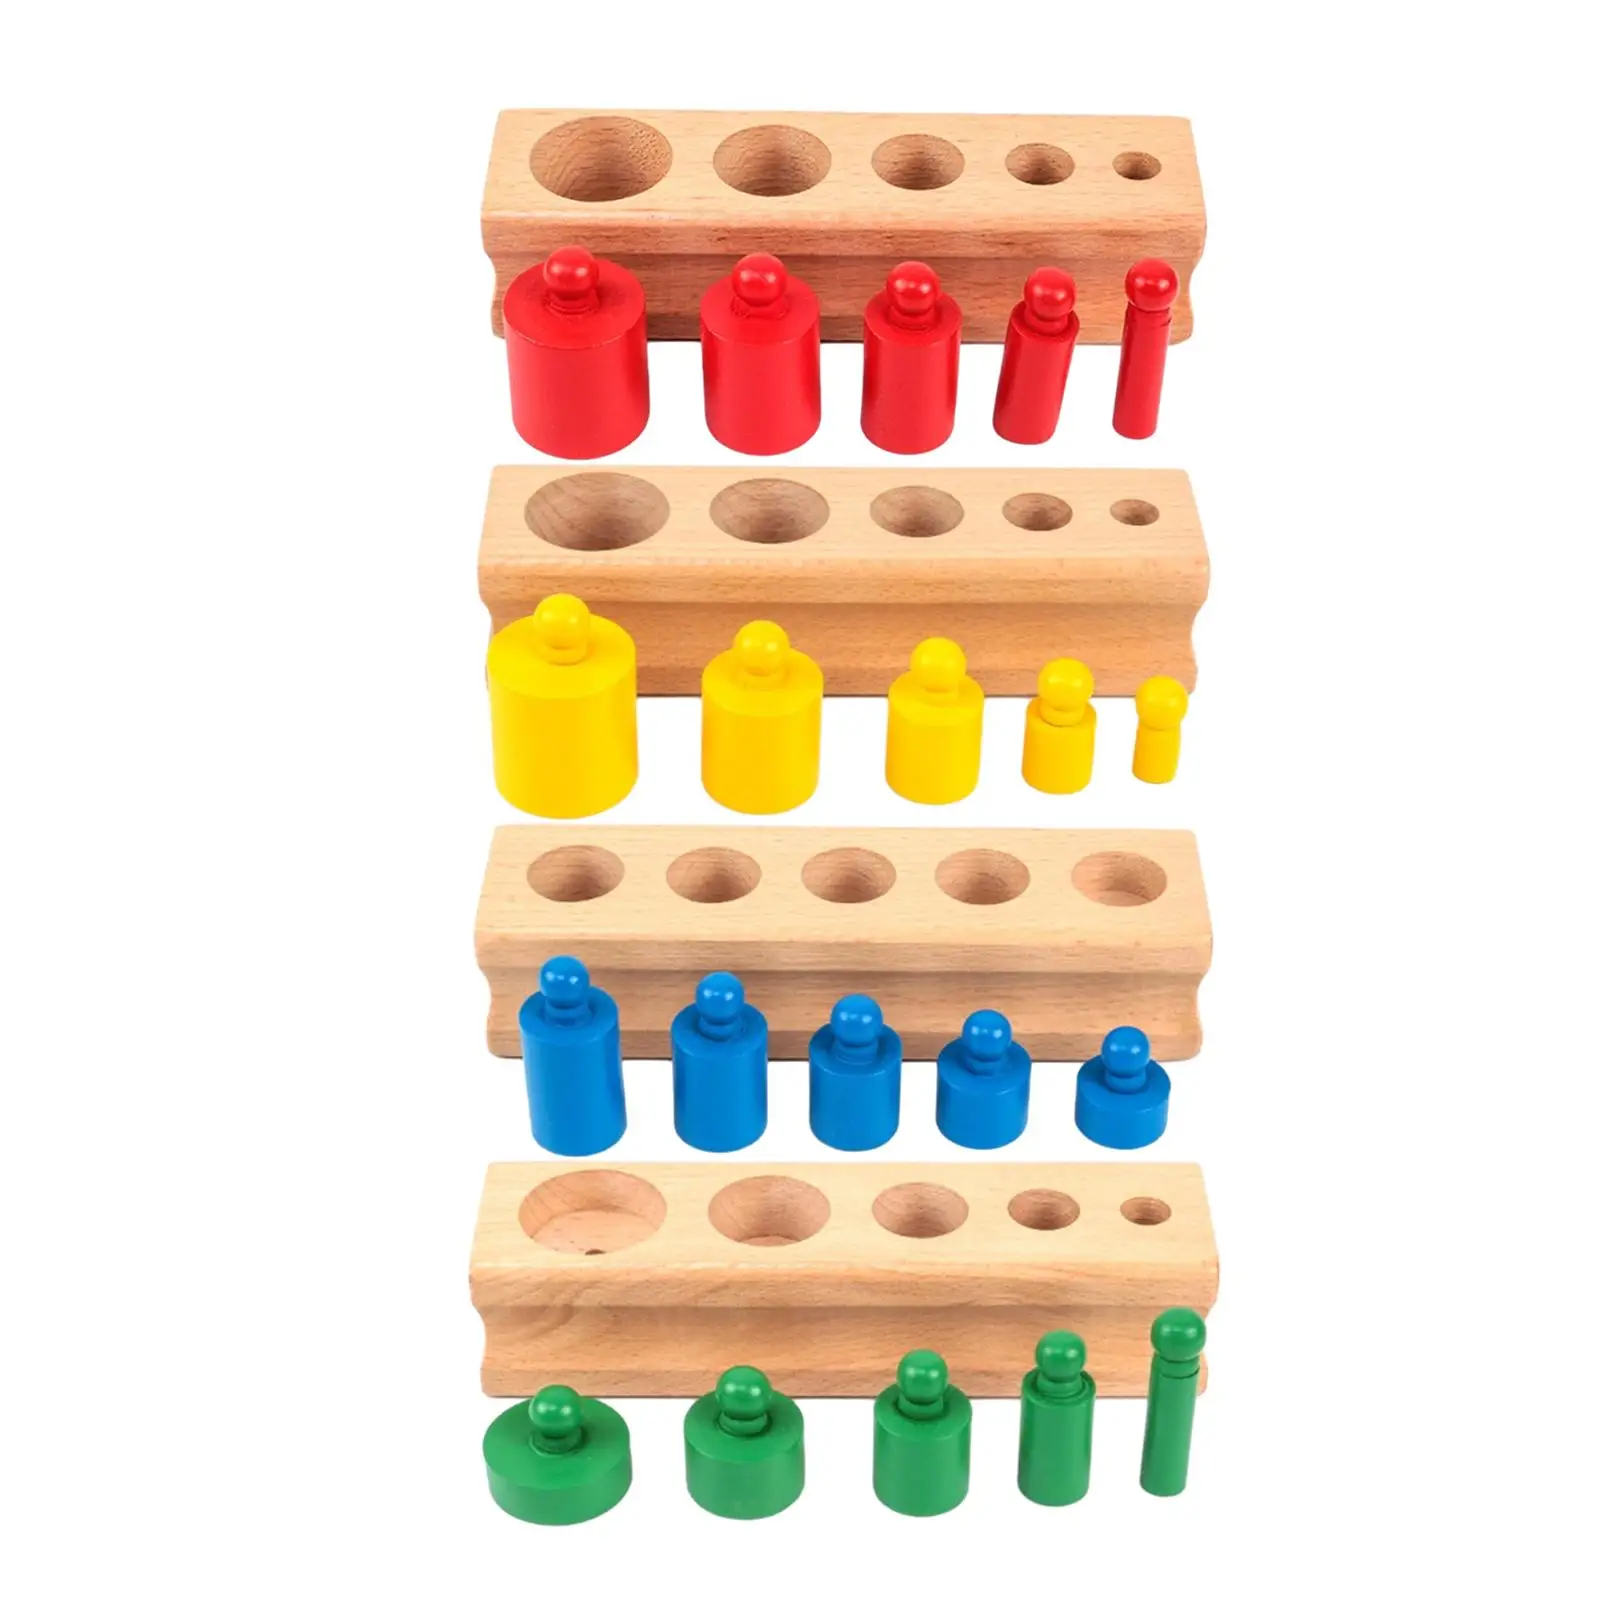 4 Pieces Knobbed Cylinders Blocks Socket Shape & Color Recognition Colorful Montessori Toy for Preschool Toys School Home Baby